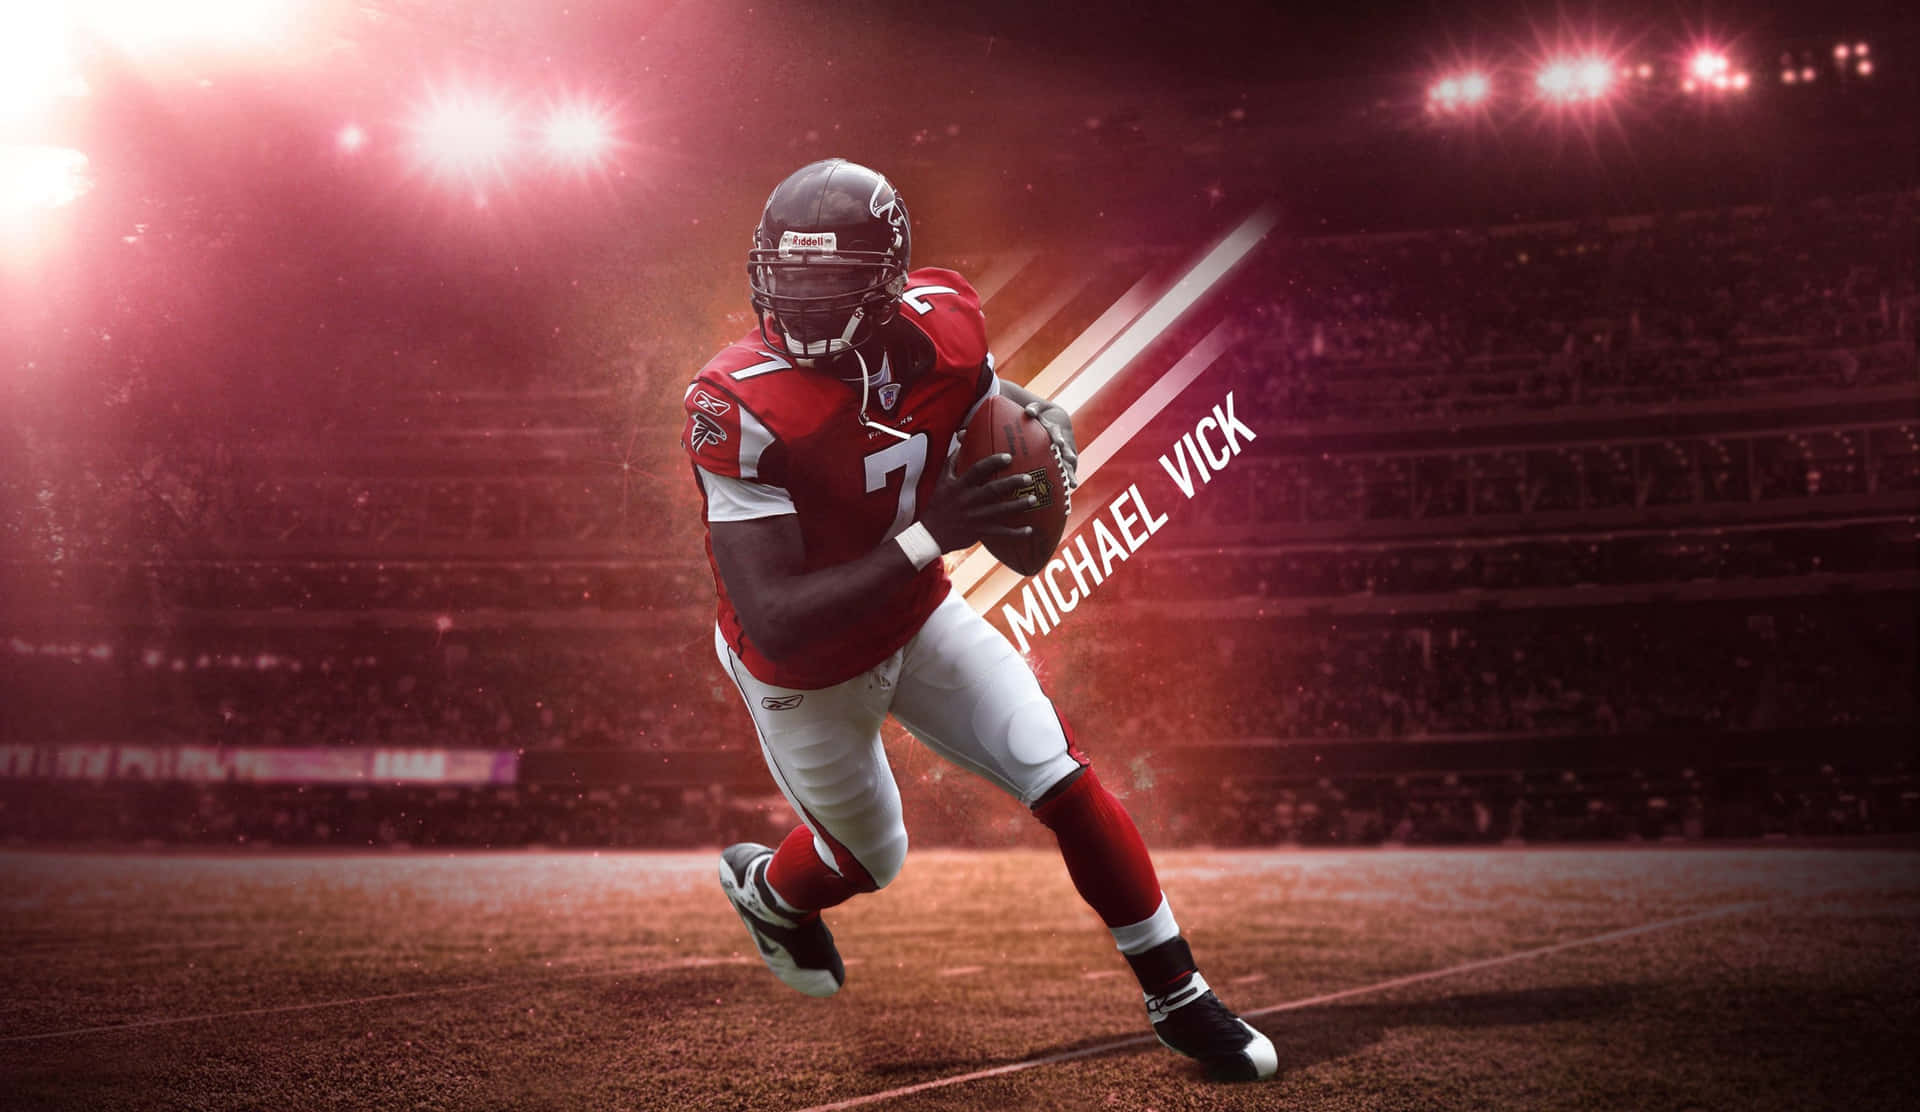 "Michael Vick at a Press Conference in 2010" Wallpaper